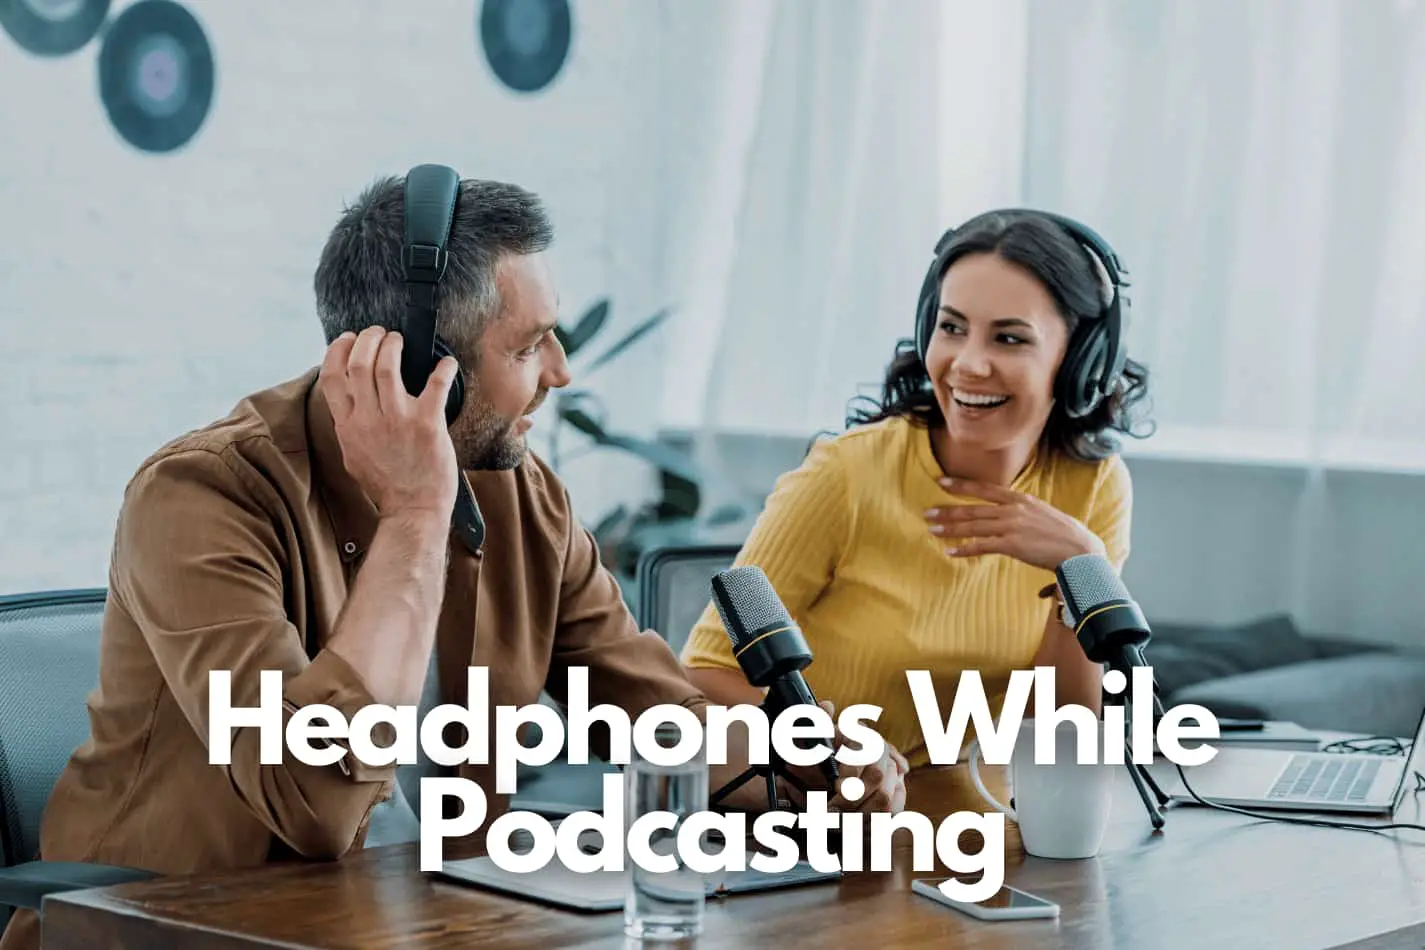 tow podcasters talking on headphones - why wear headphones while podcasting